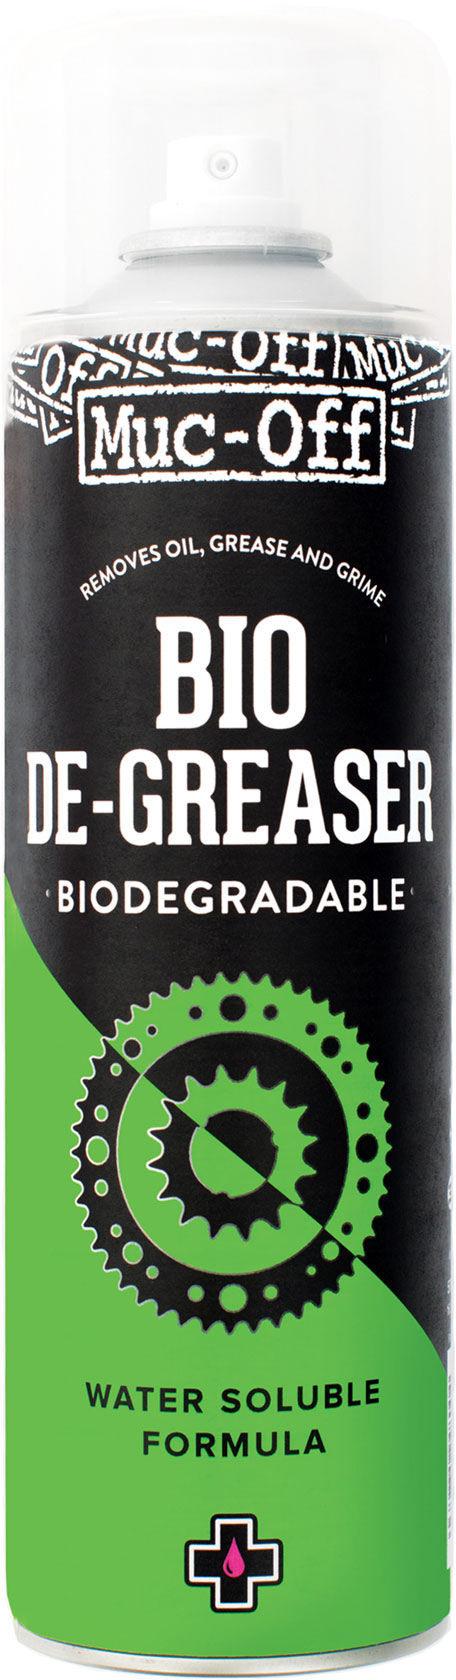 Muc-off Water Soluble Bike Degreaser (500ml) - Transparent